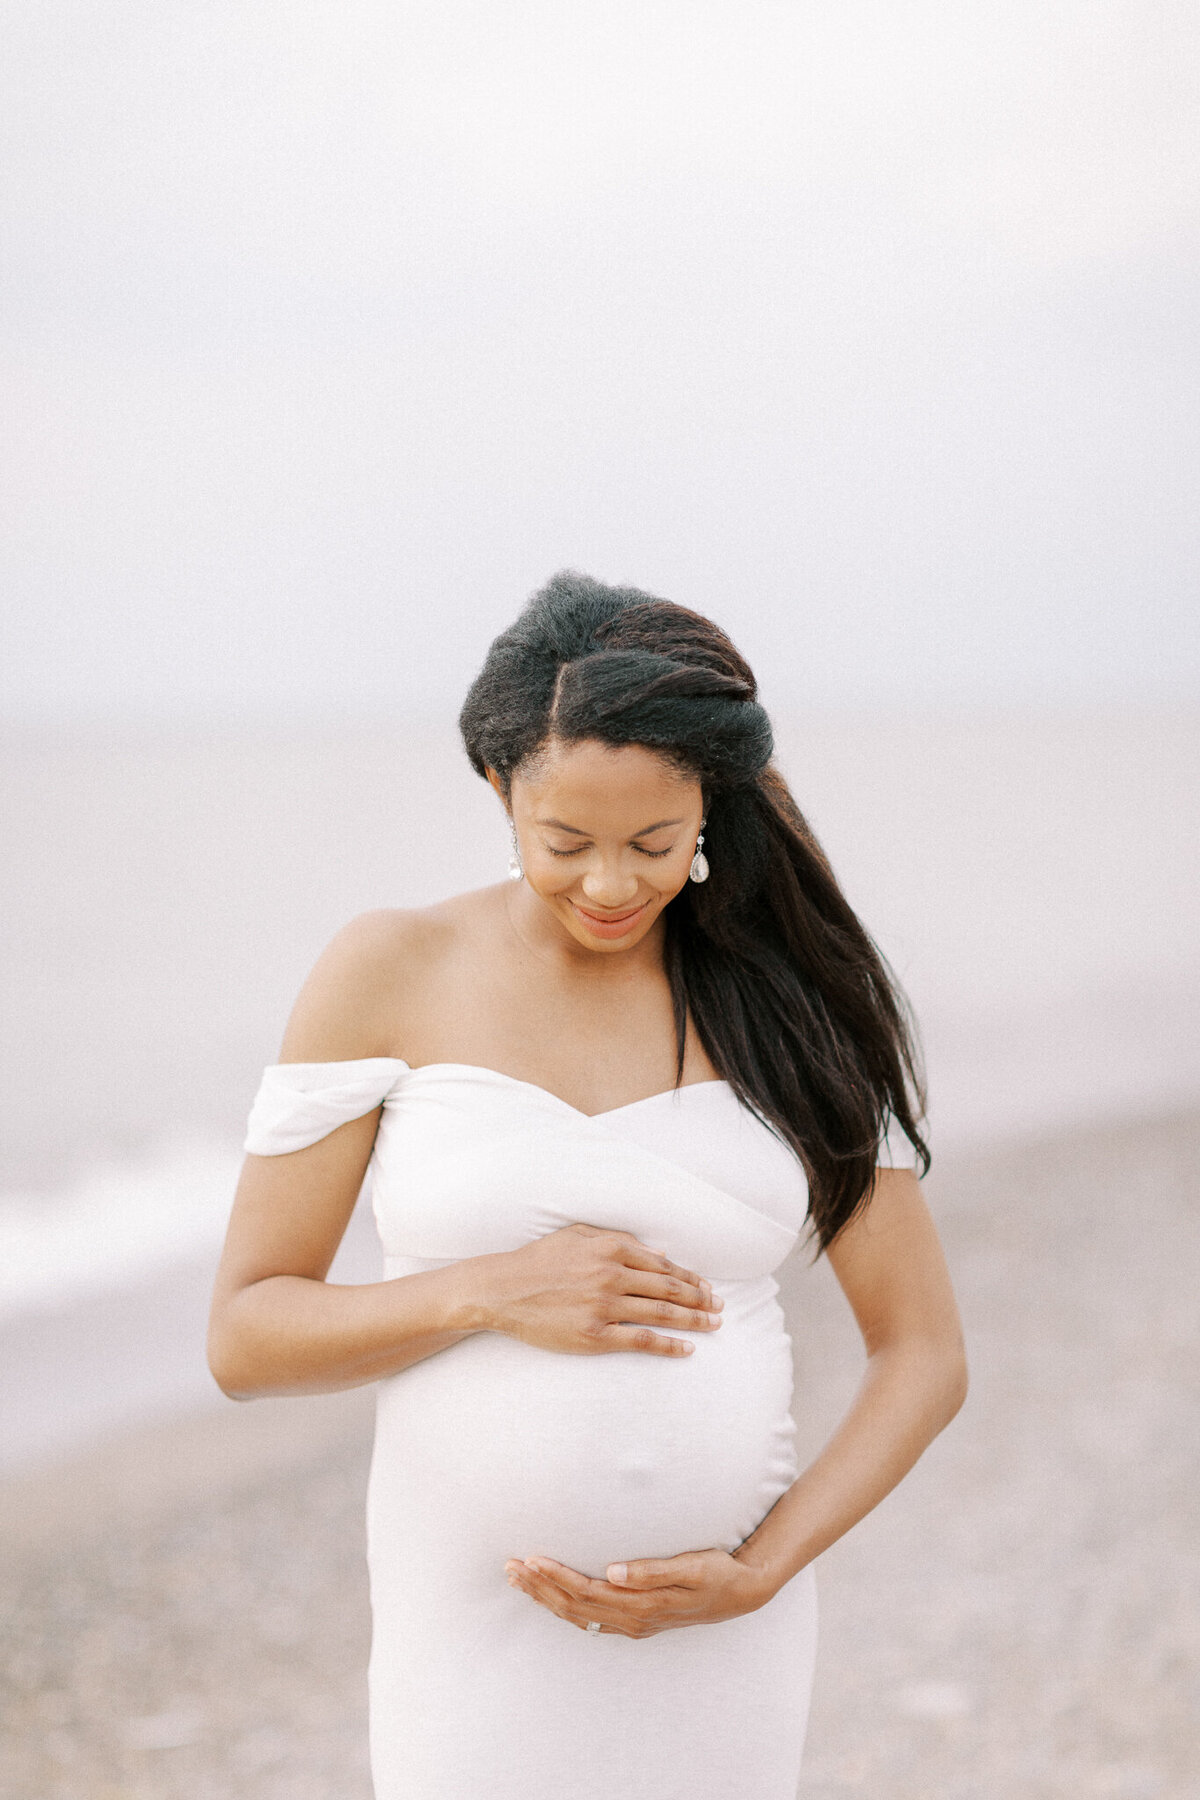 Best Maternity Photographer in Cleveland Ohio